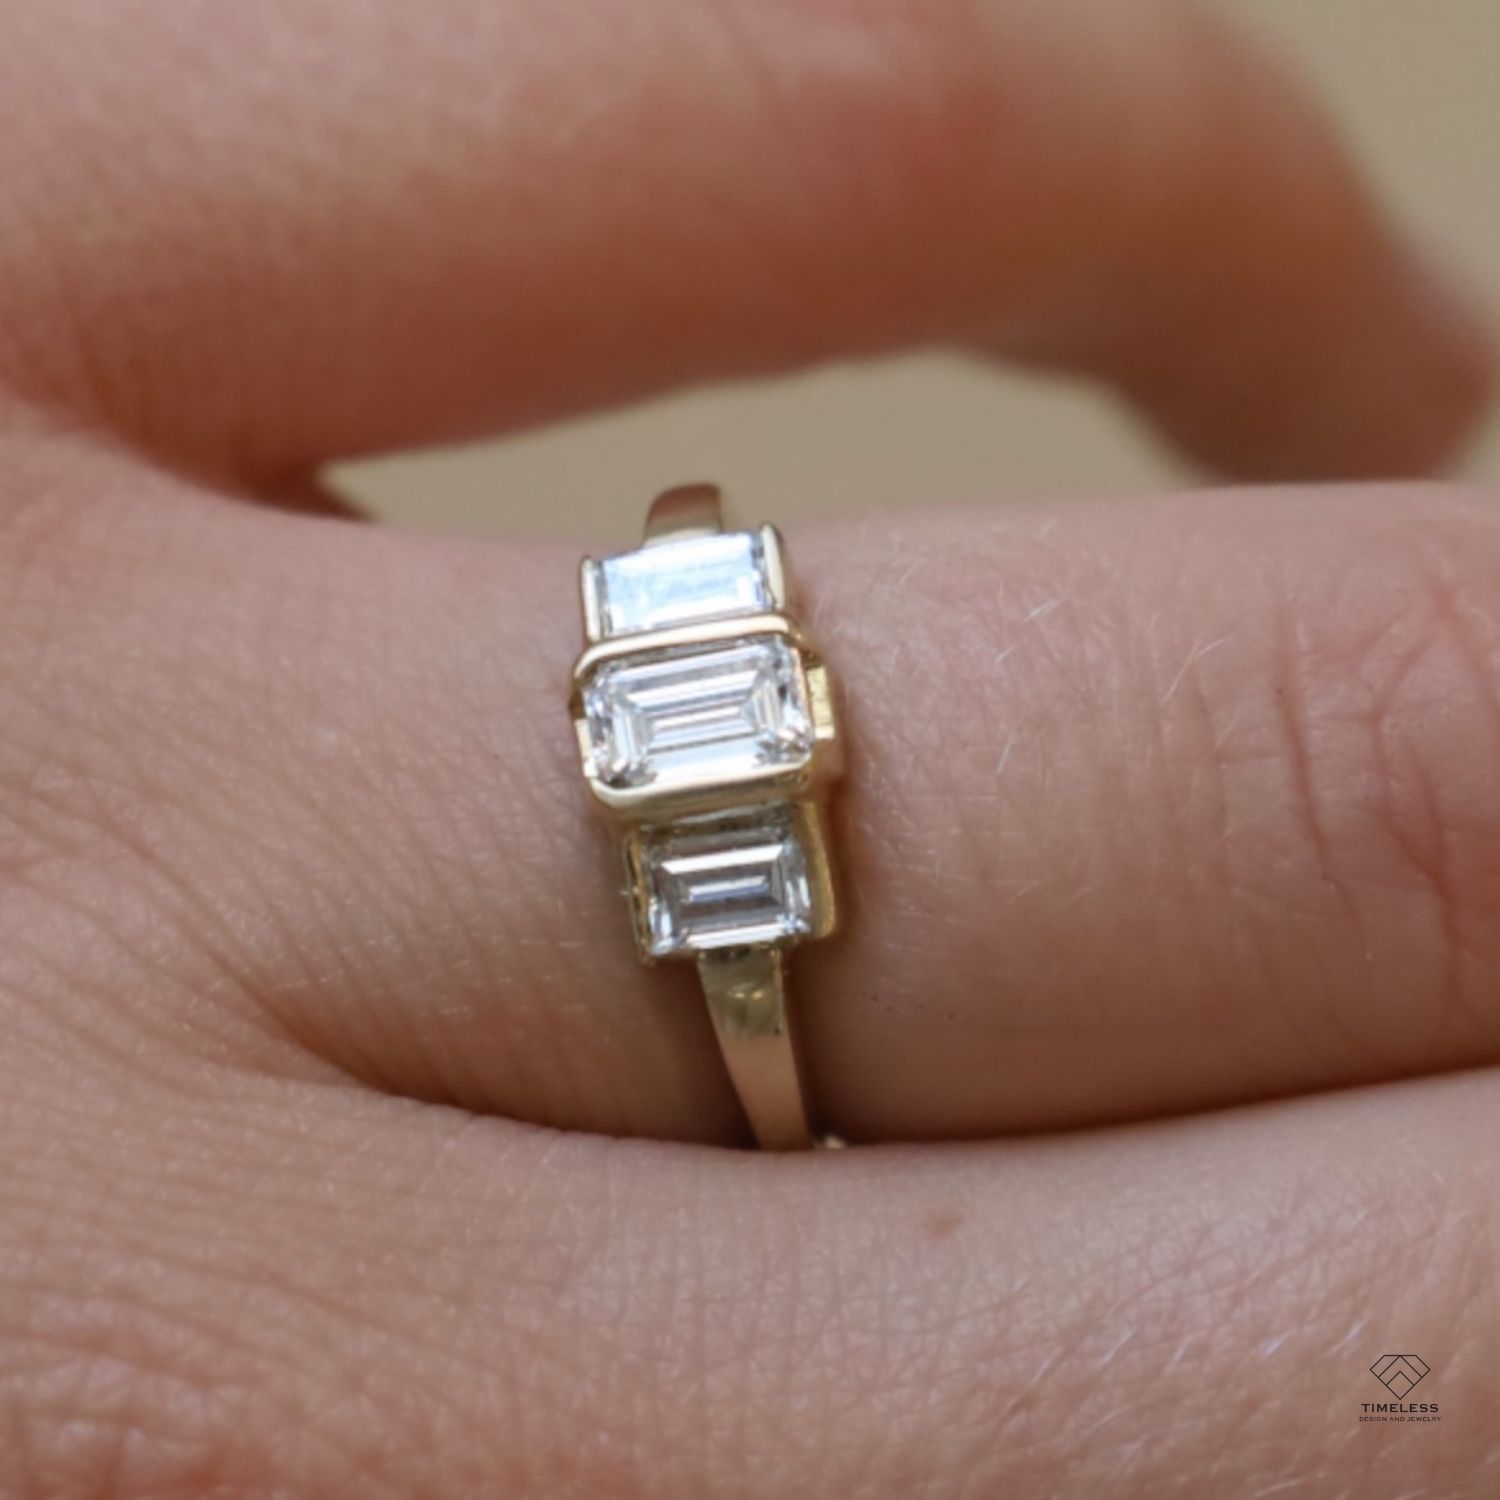 Custom Gold Emerald Cut Diamond Engagement Ring in Salt Lake City by Timeless Design and Jewelry